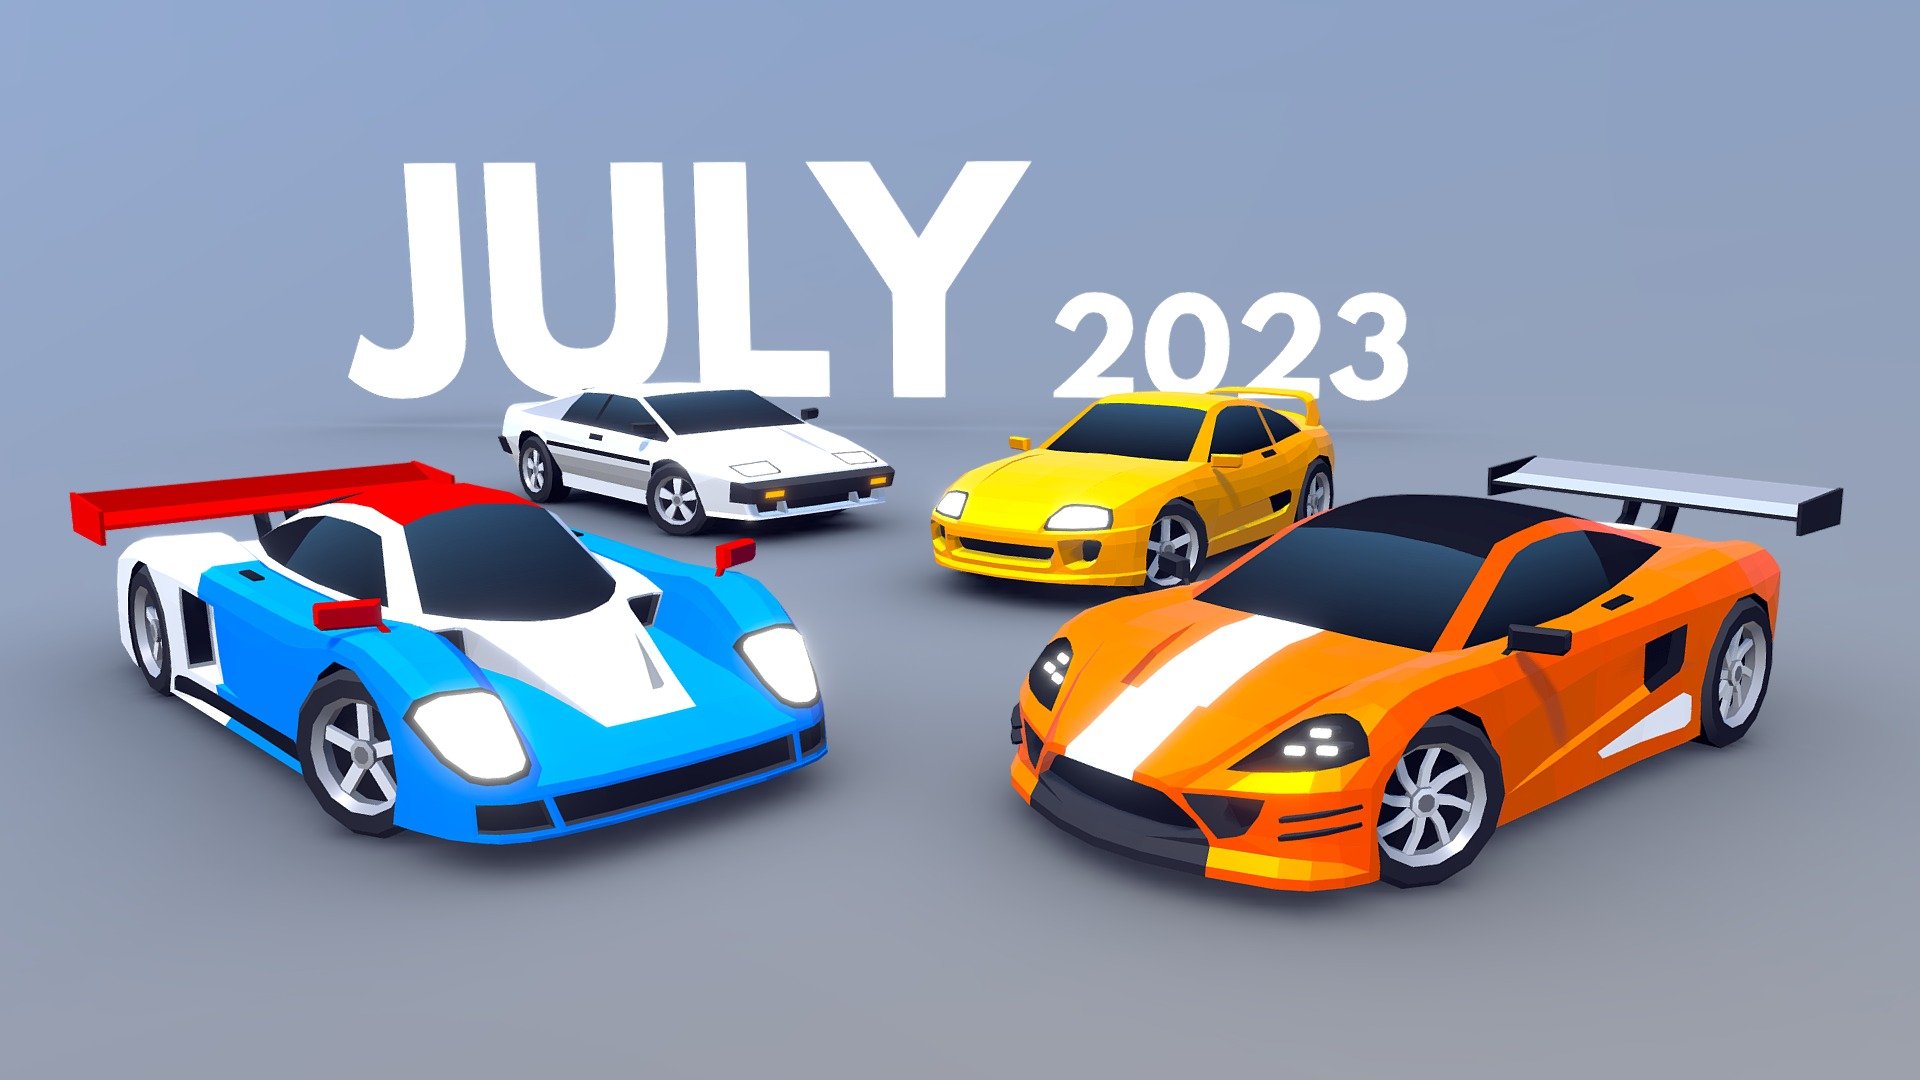 Hello!, this is the July 2023 update of Low Poly Cars - Mega Pack. This is available in the Unity Asset Store and Sketchfab (click here). Update will be available on July 2nd 3d model